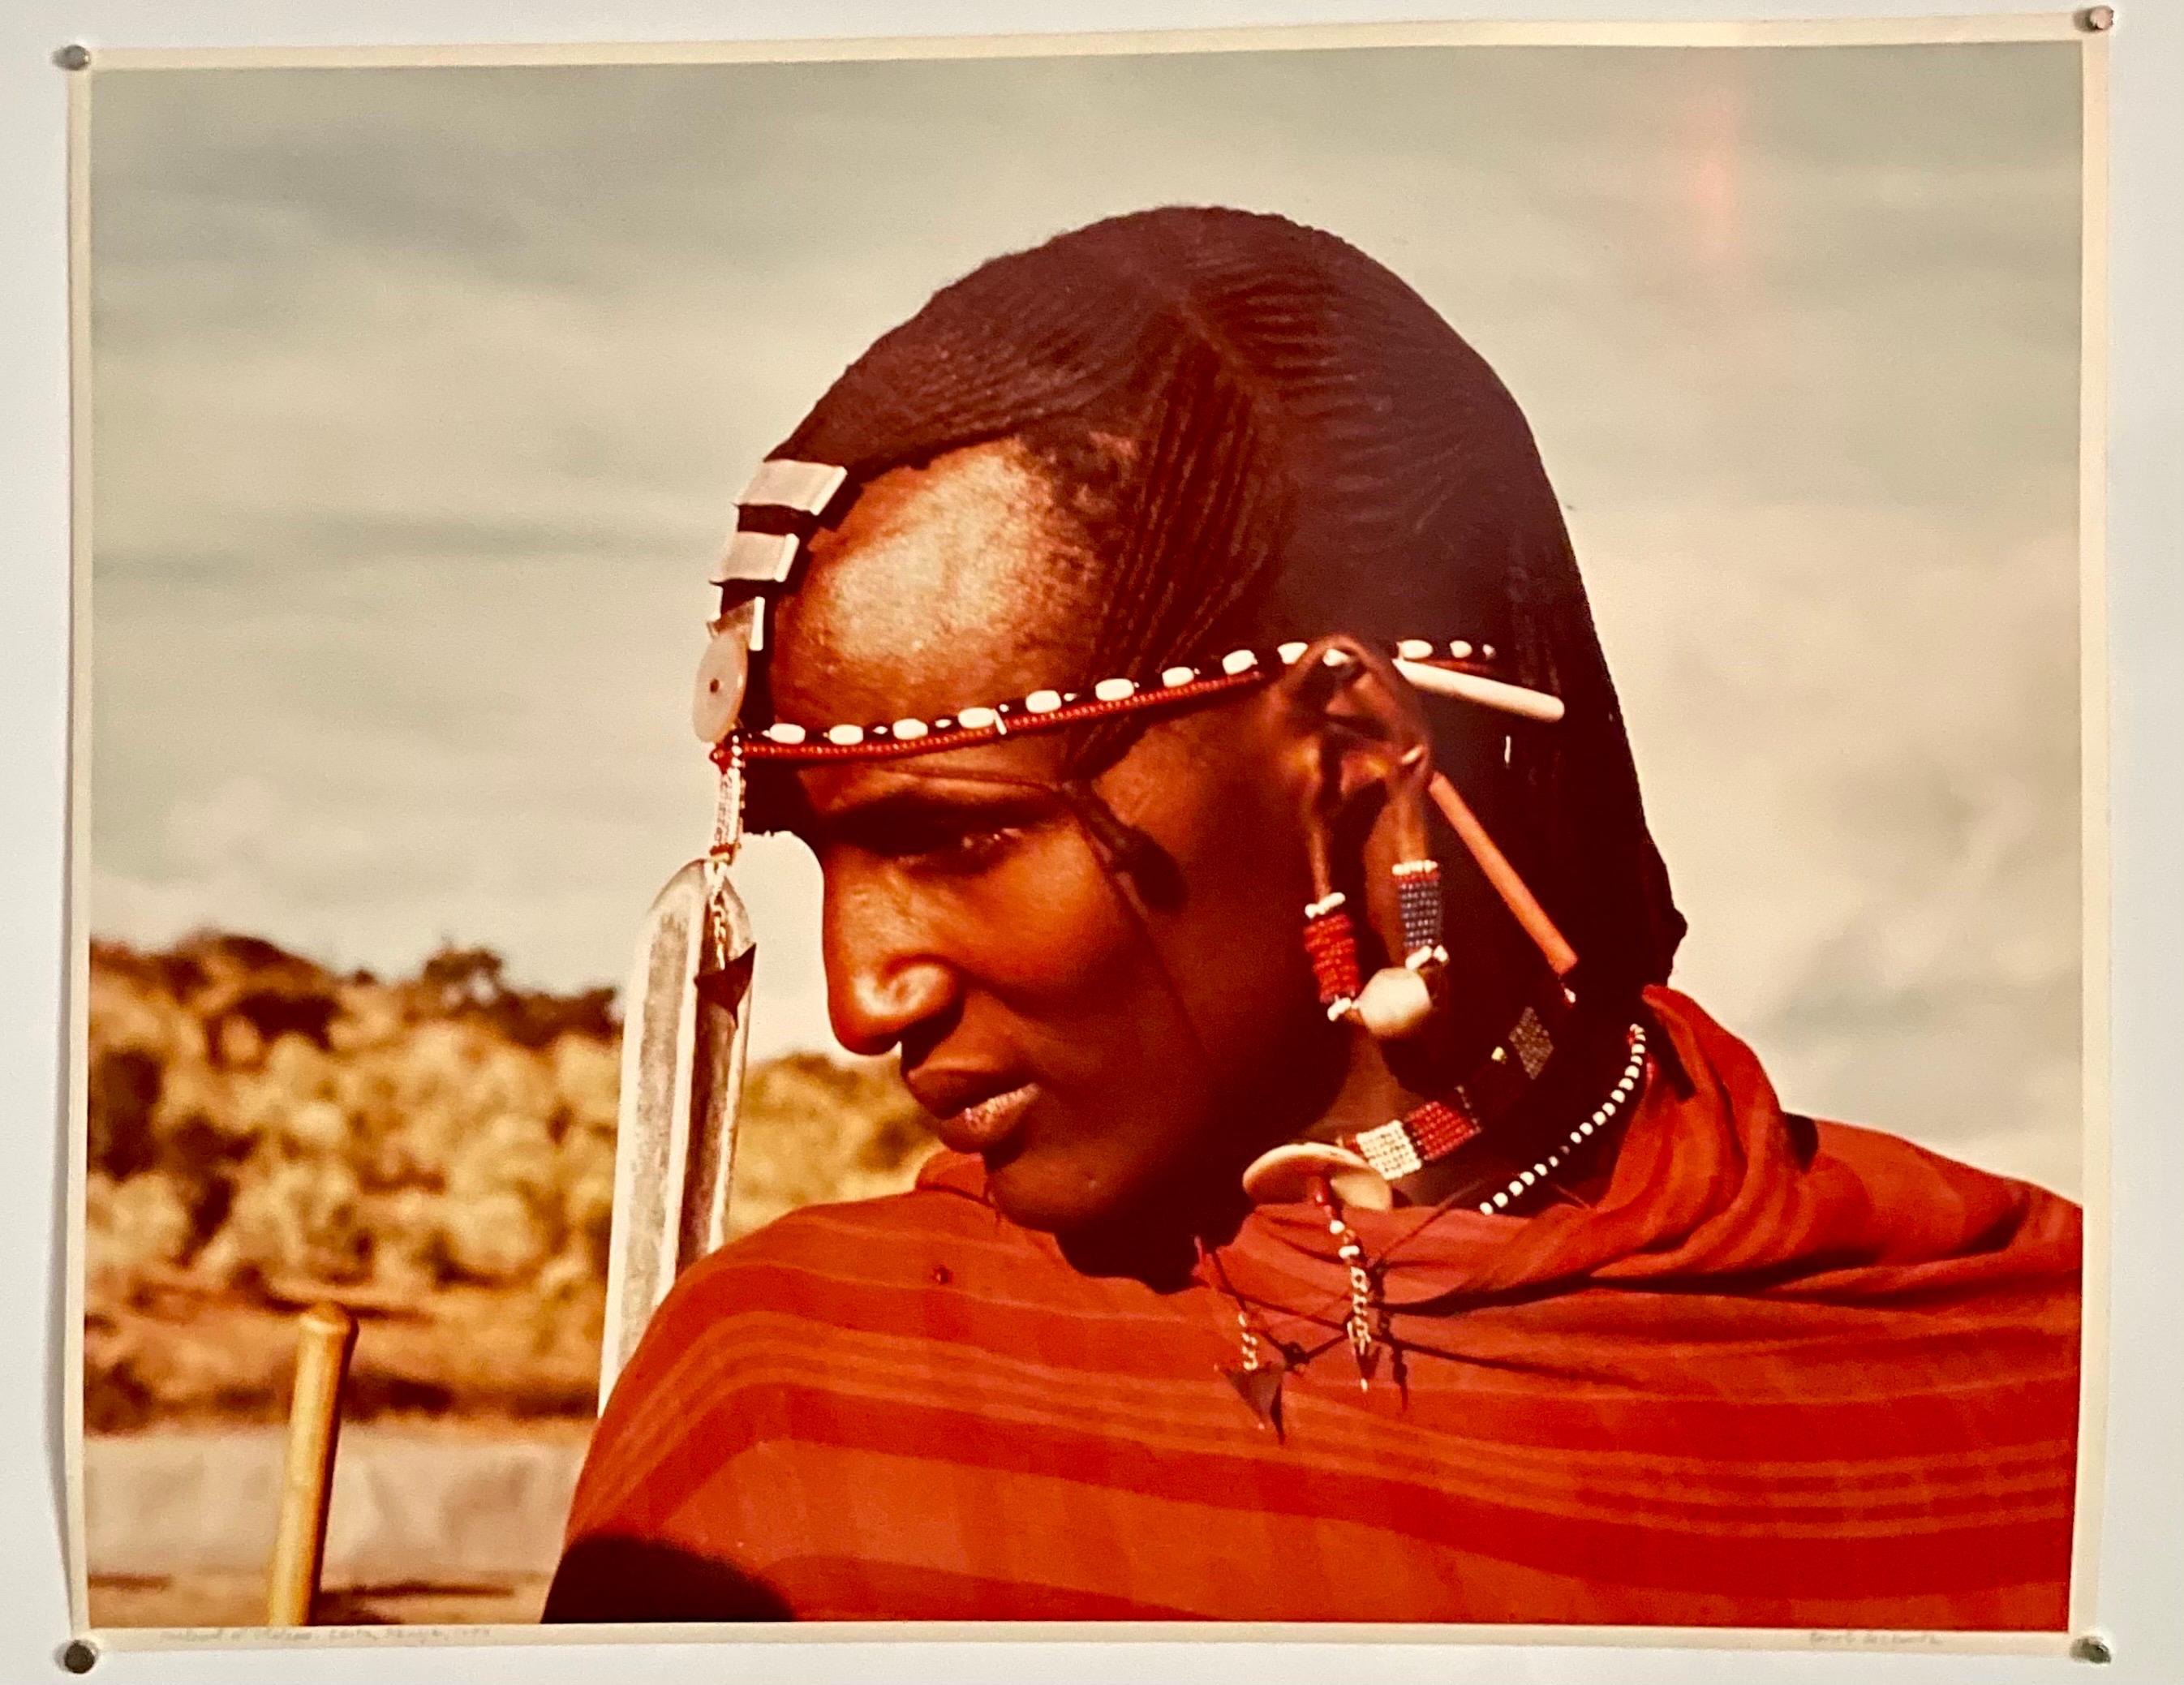 Rare Vintage Color C Print Photograph African Maasai Warrior Chromogenic Photo  - Beige Portrait Photograph by Carol Beckwith